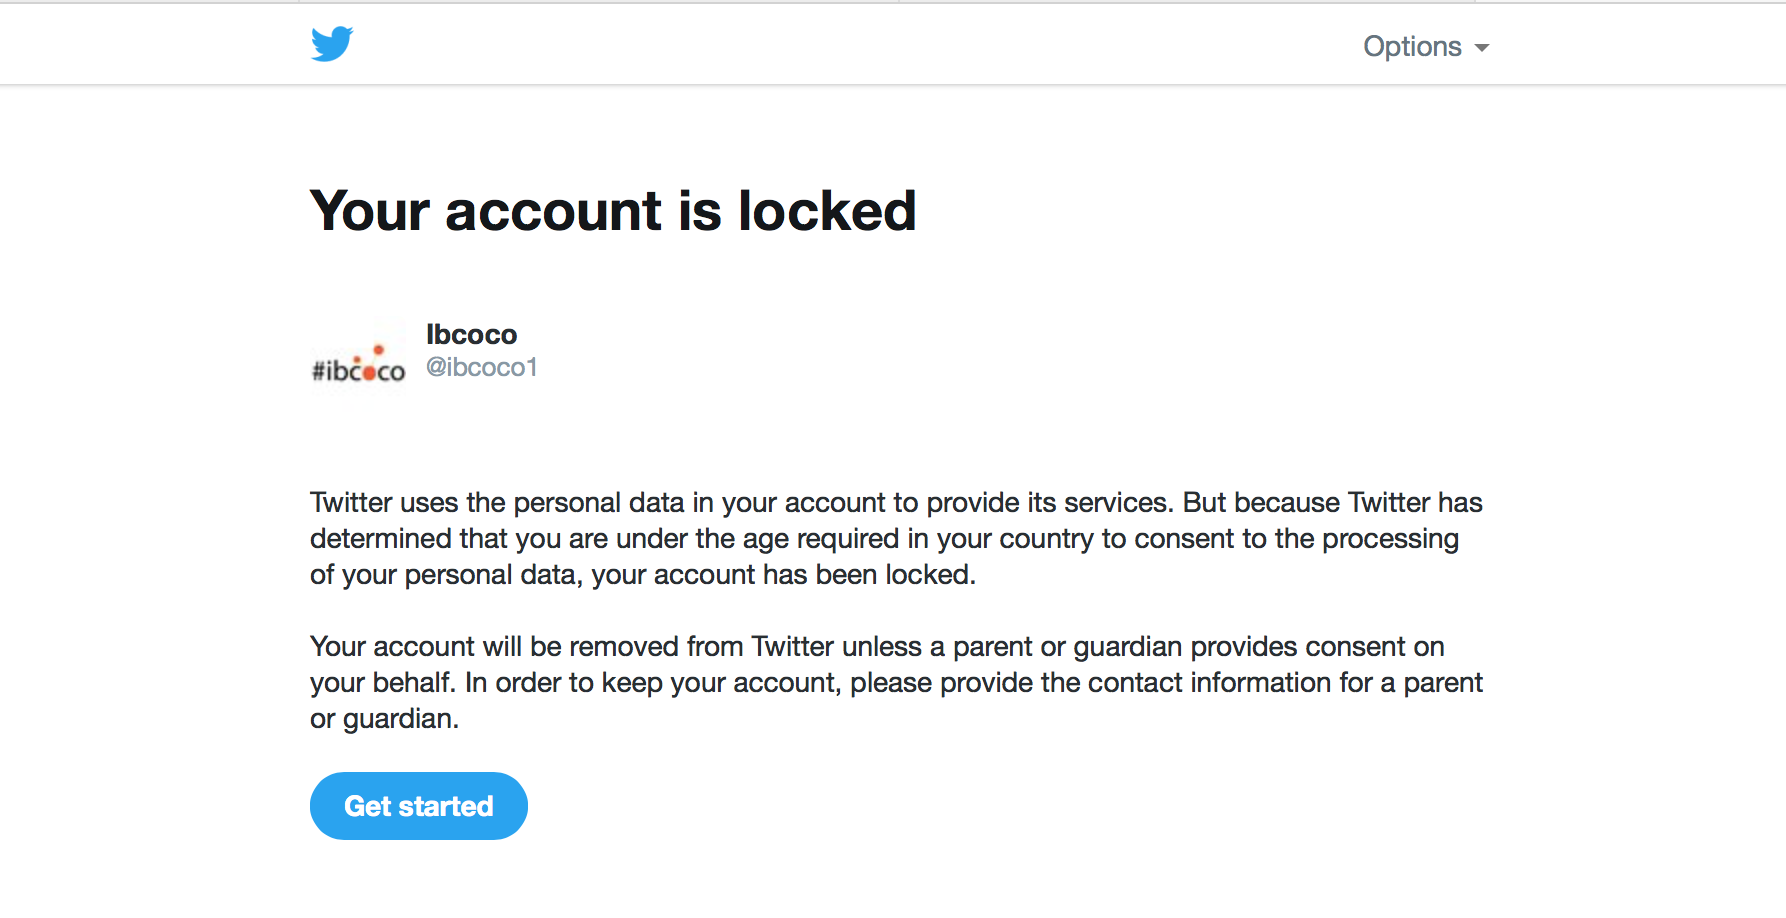 ibcoco1 is locked